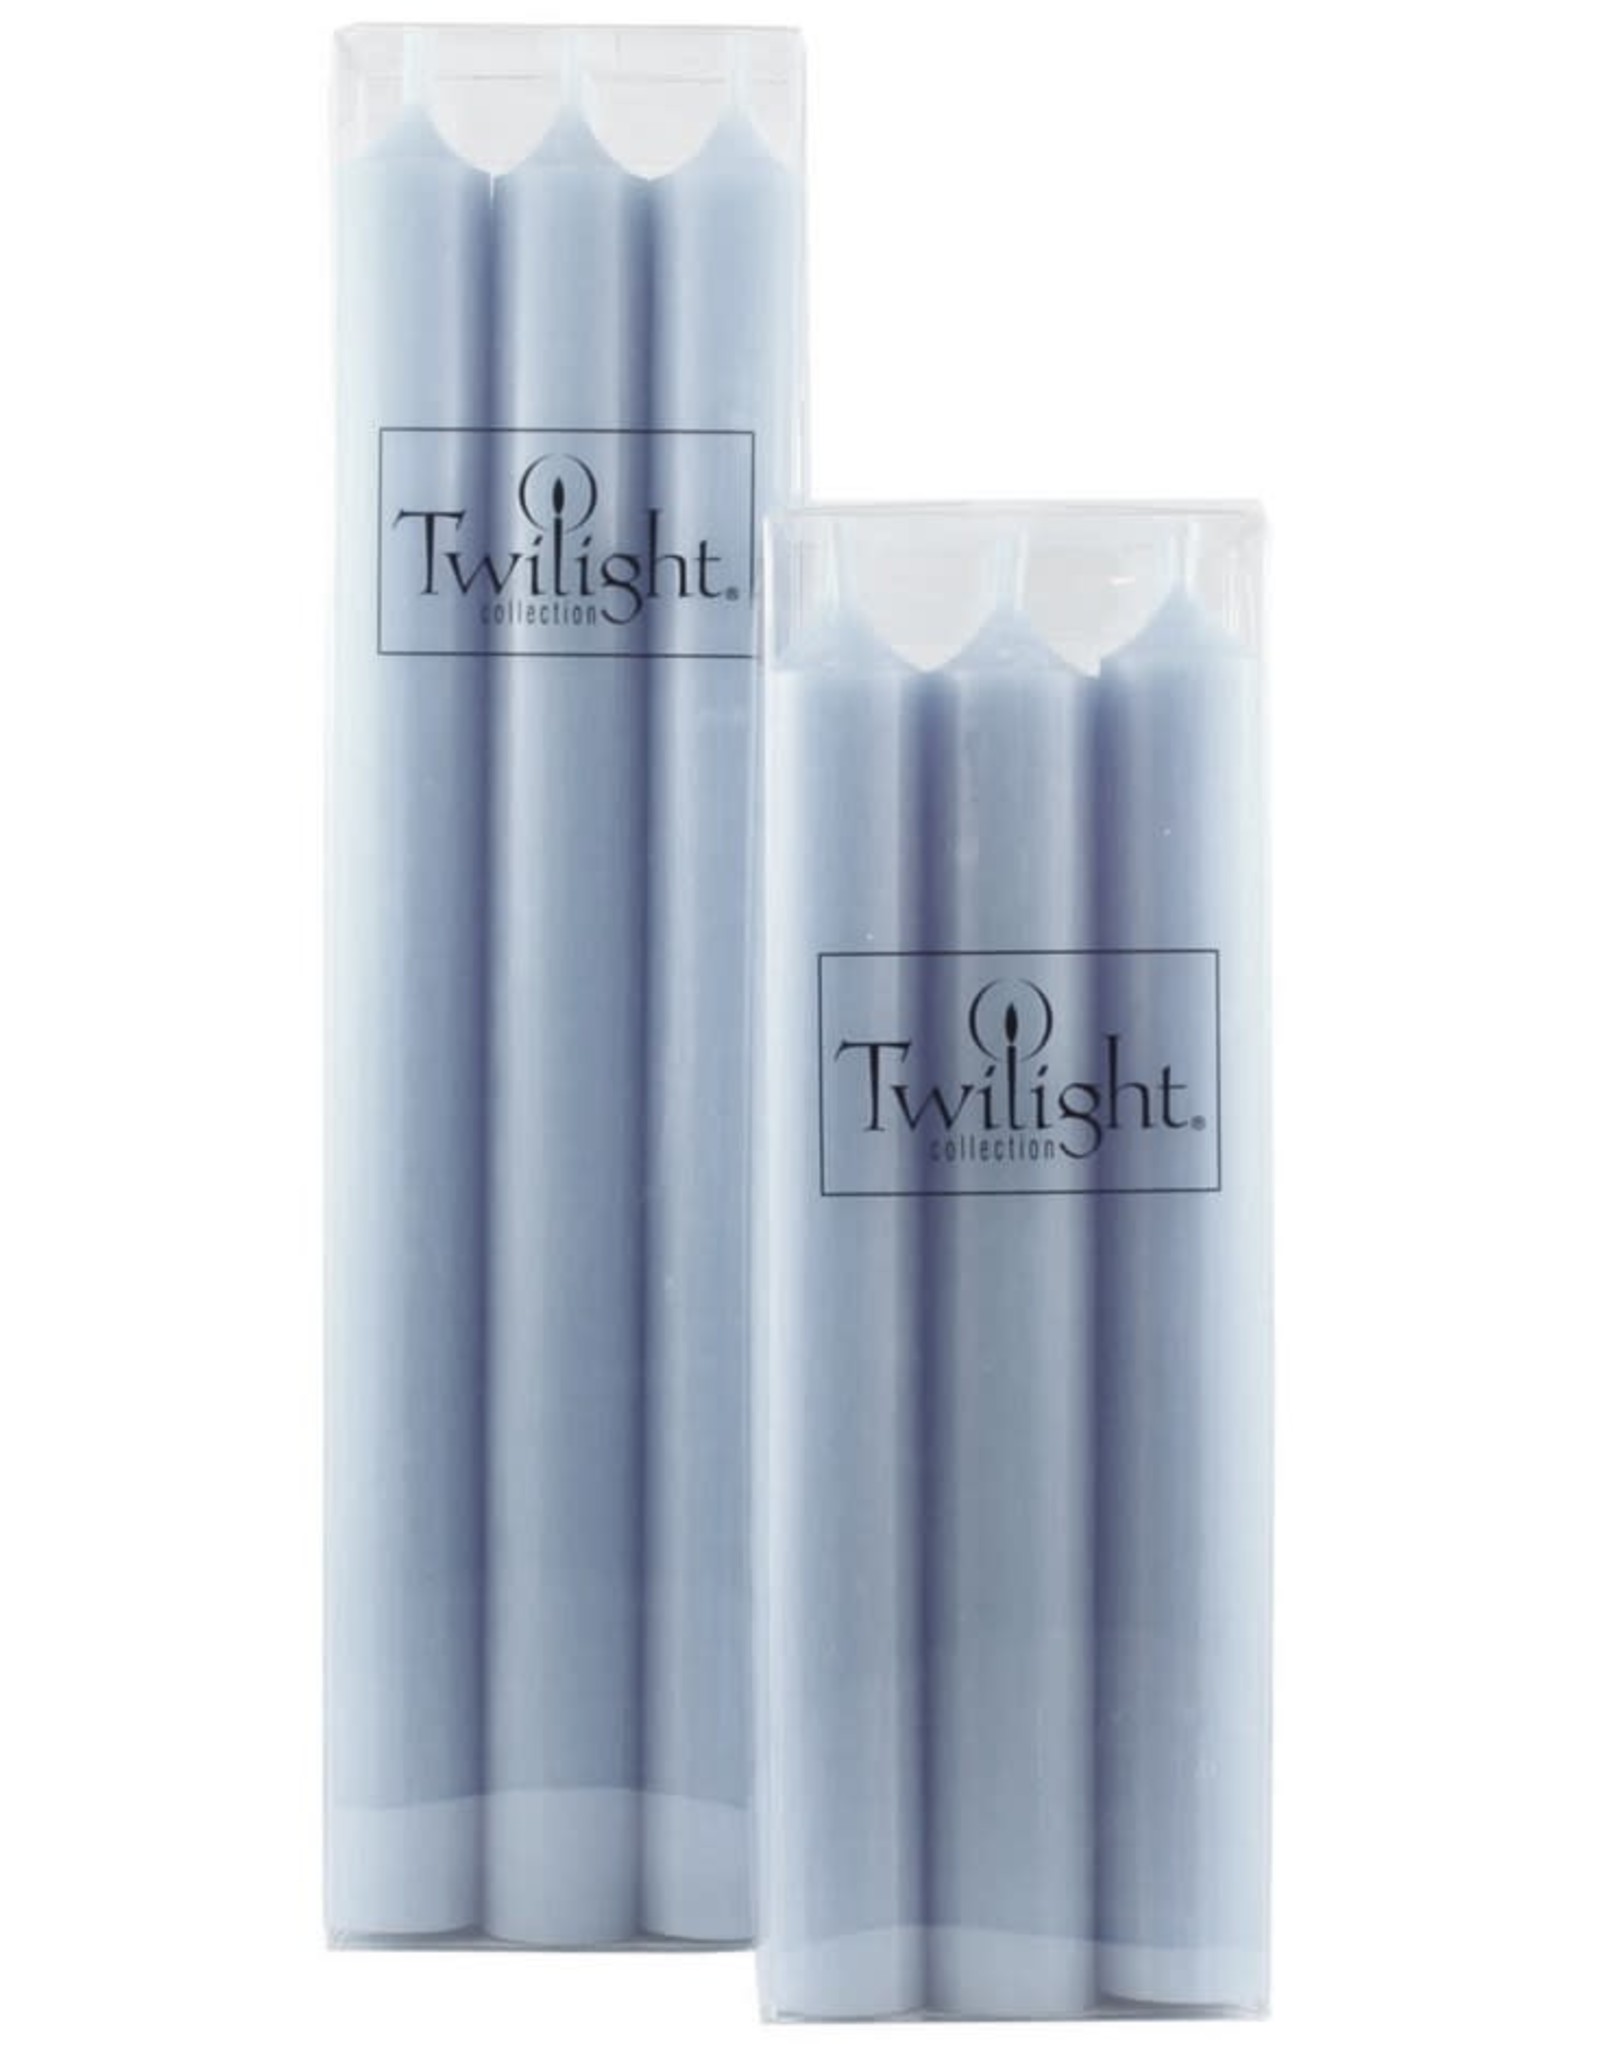 Twilight 7" candle - 6 pack CLICK